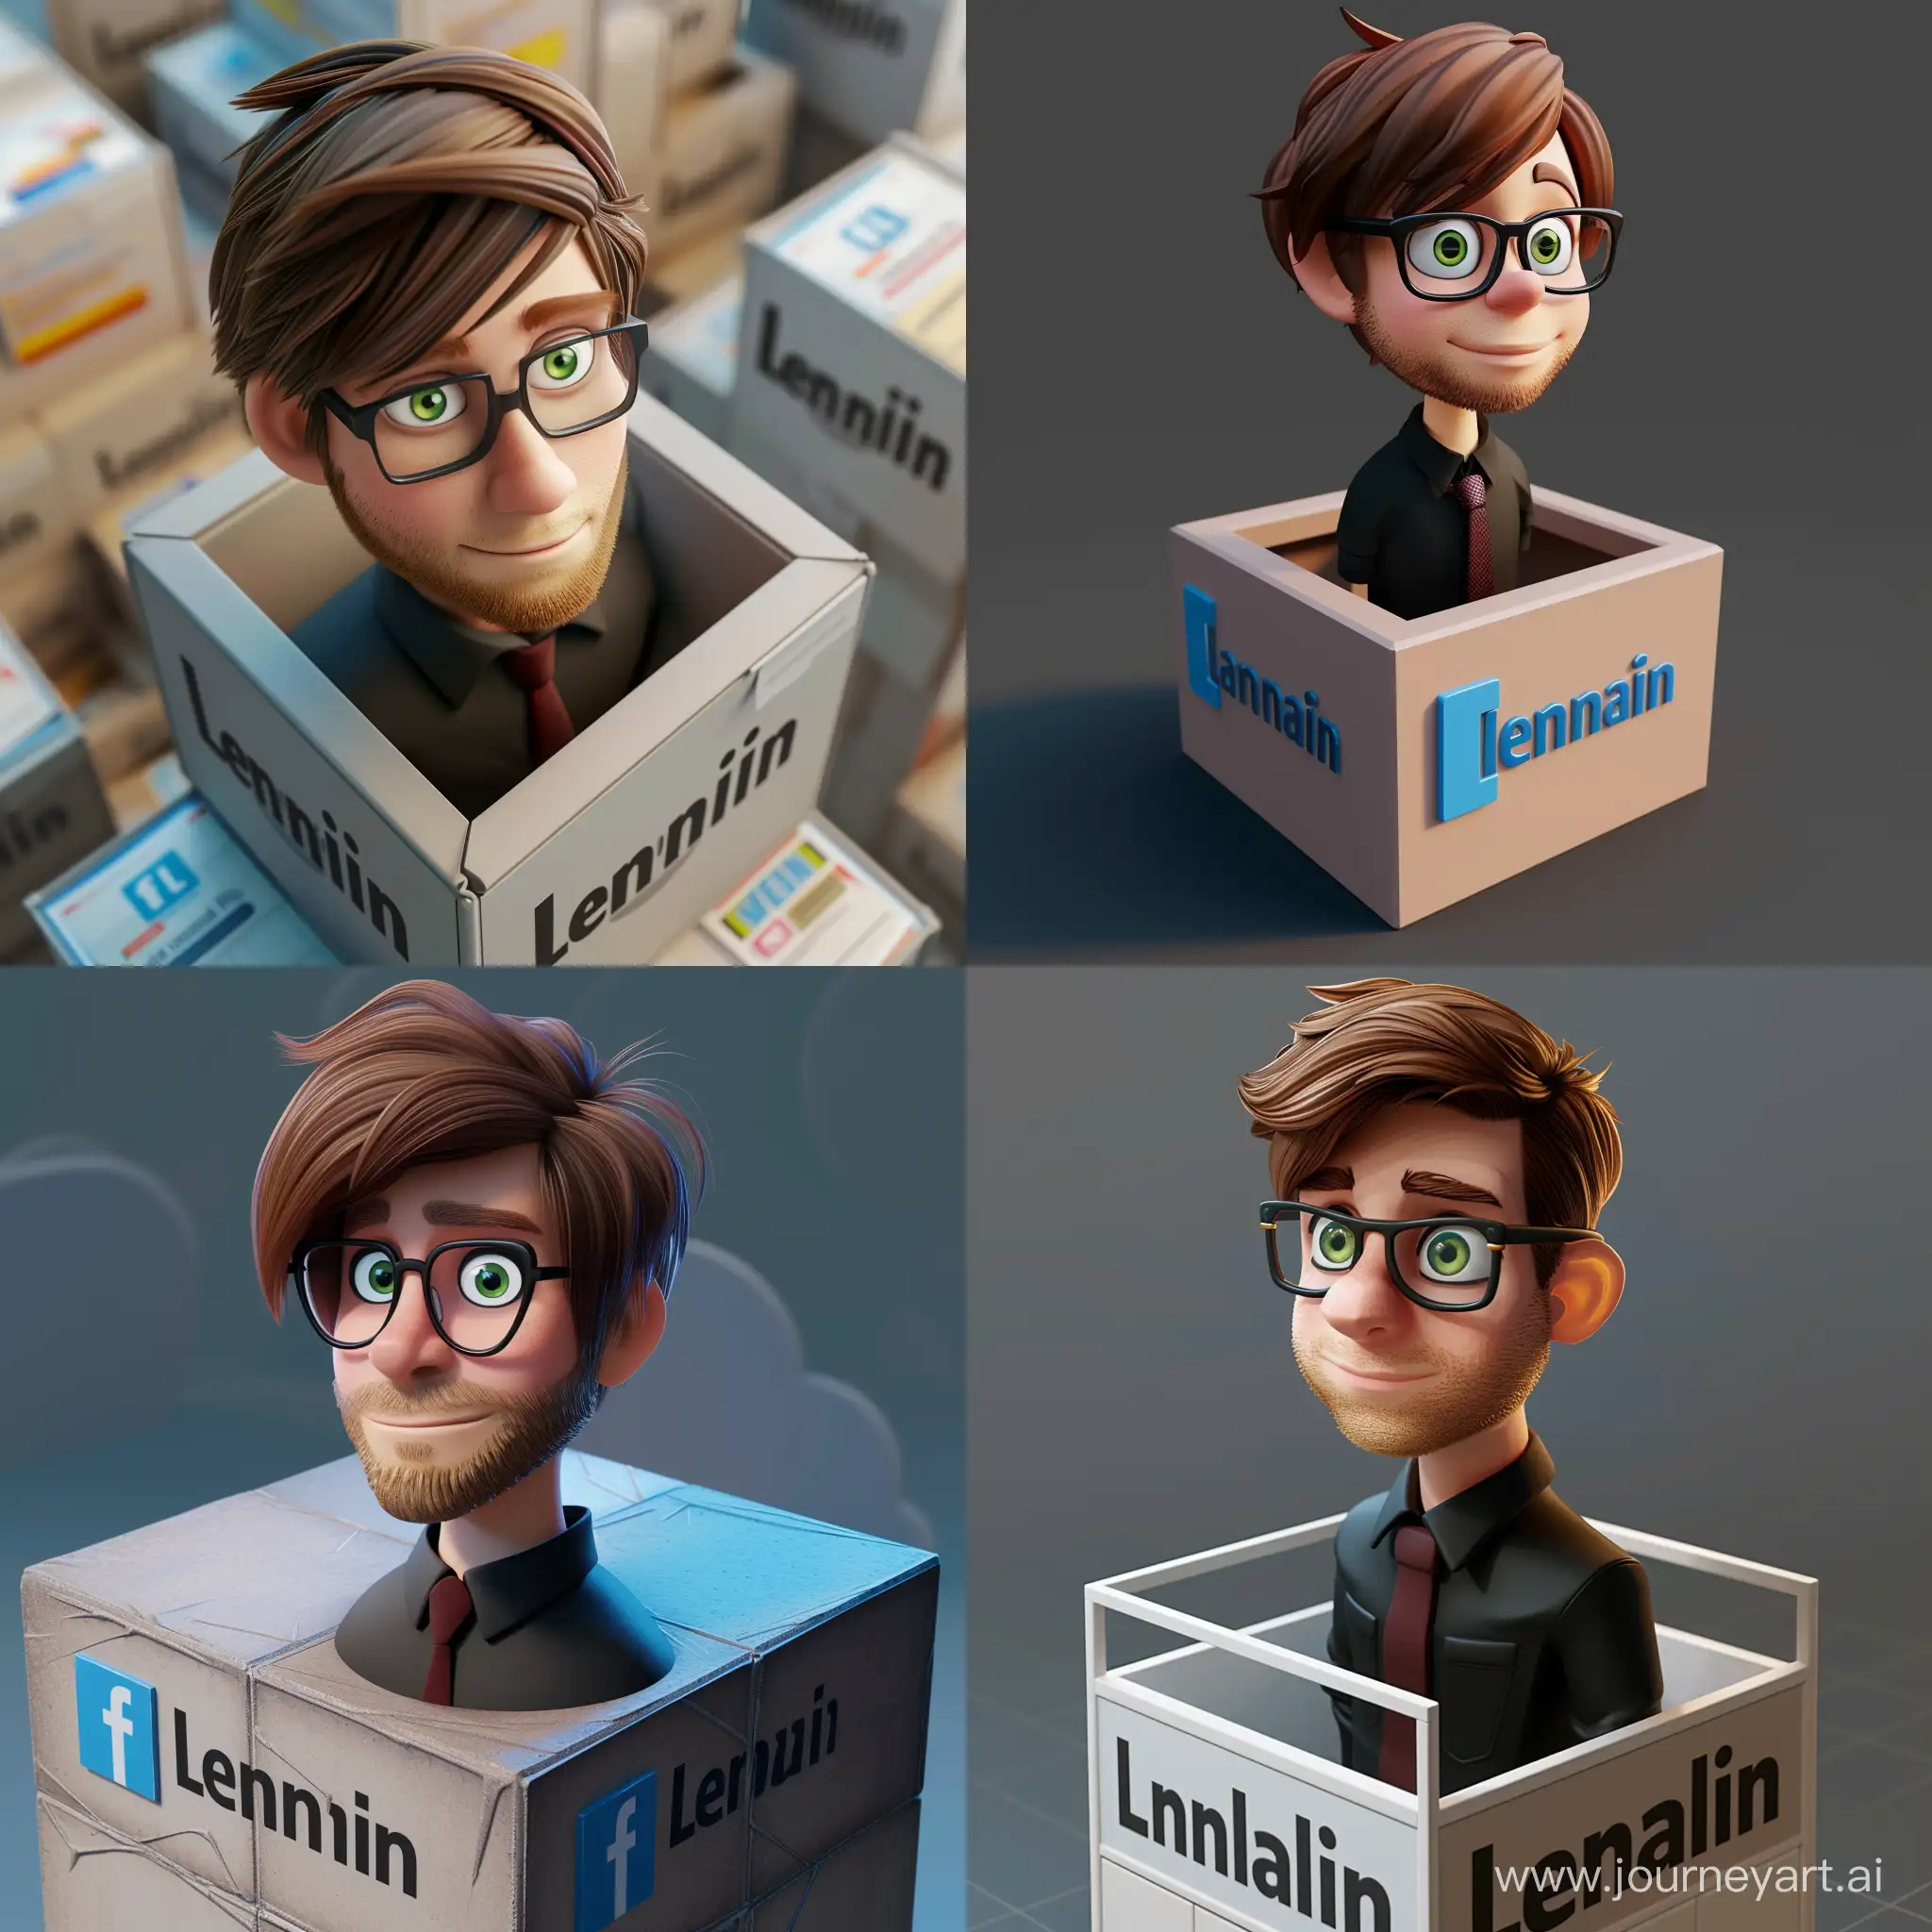 Create a 3d animated man with brown side fringe hair, trimmed beard, green eyes, thin black glasses standing on top of a cubical logo "LinkedIn". The character wears a black collared shirt and dark red tie. The background of the character is a mockup of his LinkedIn profile page with the profile name "Lari Lenhard" and a profile picture the same as the character.